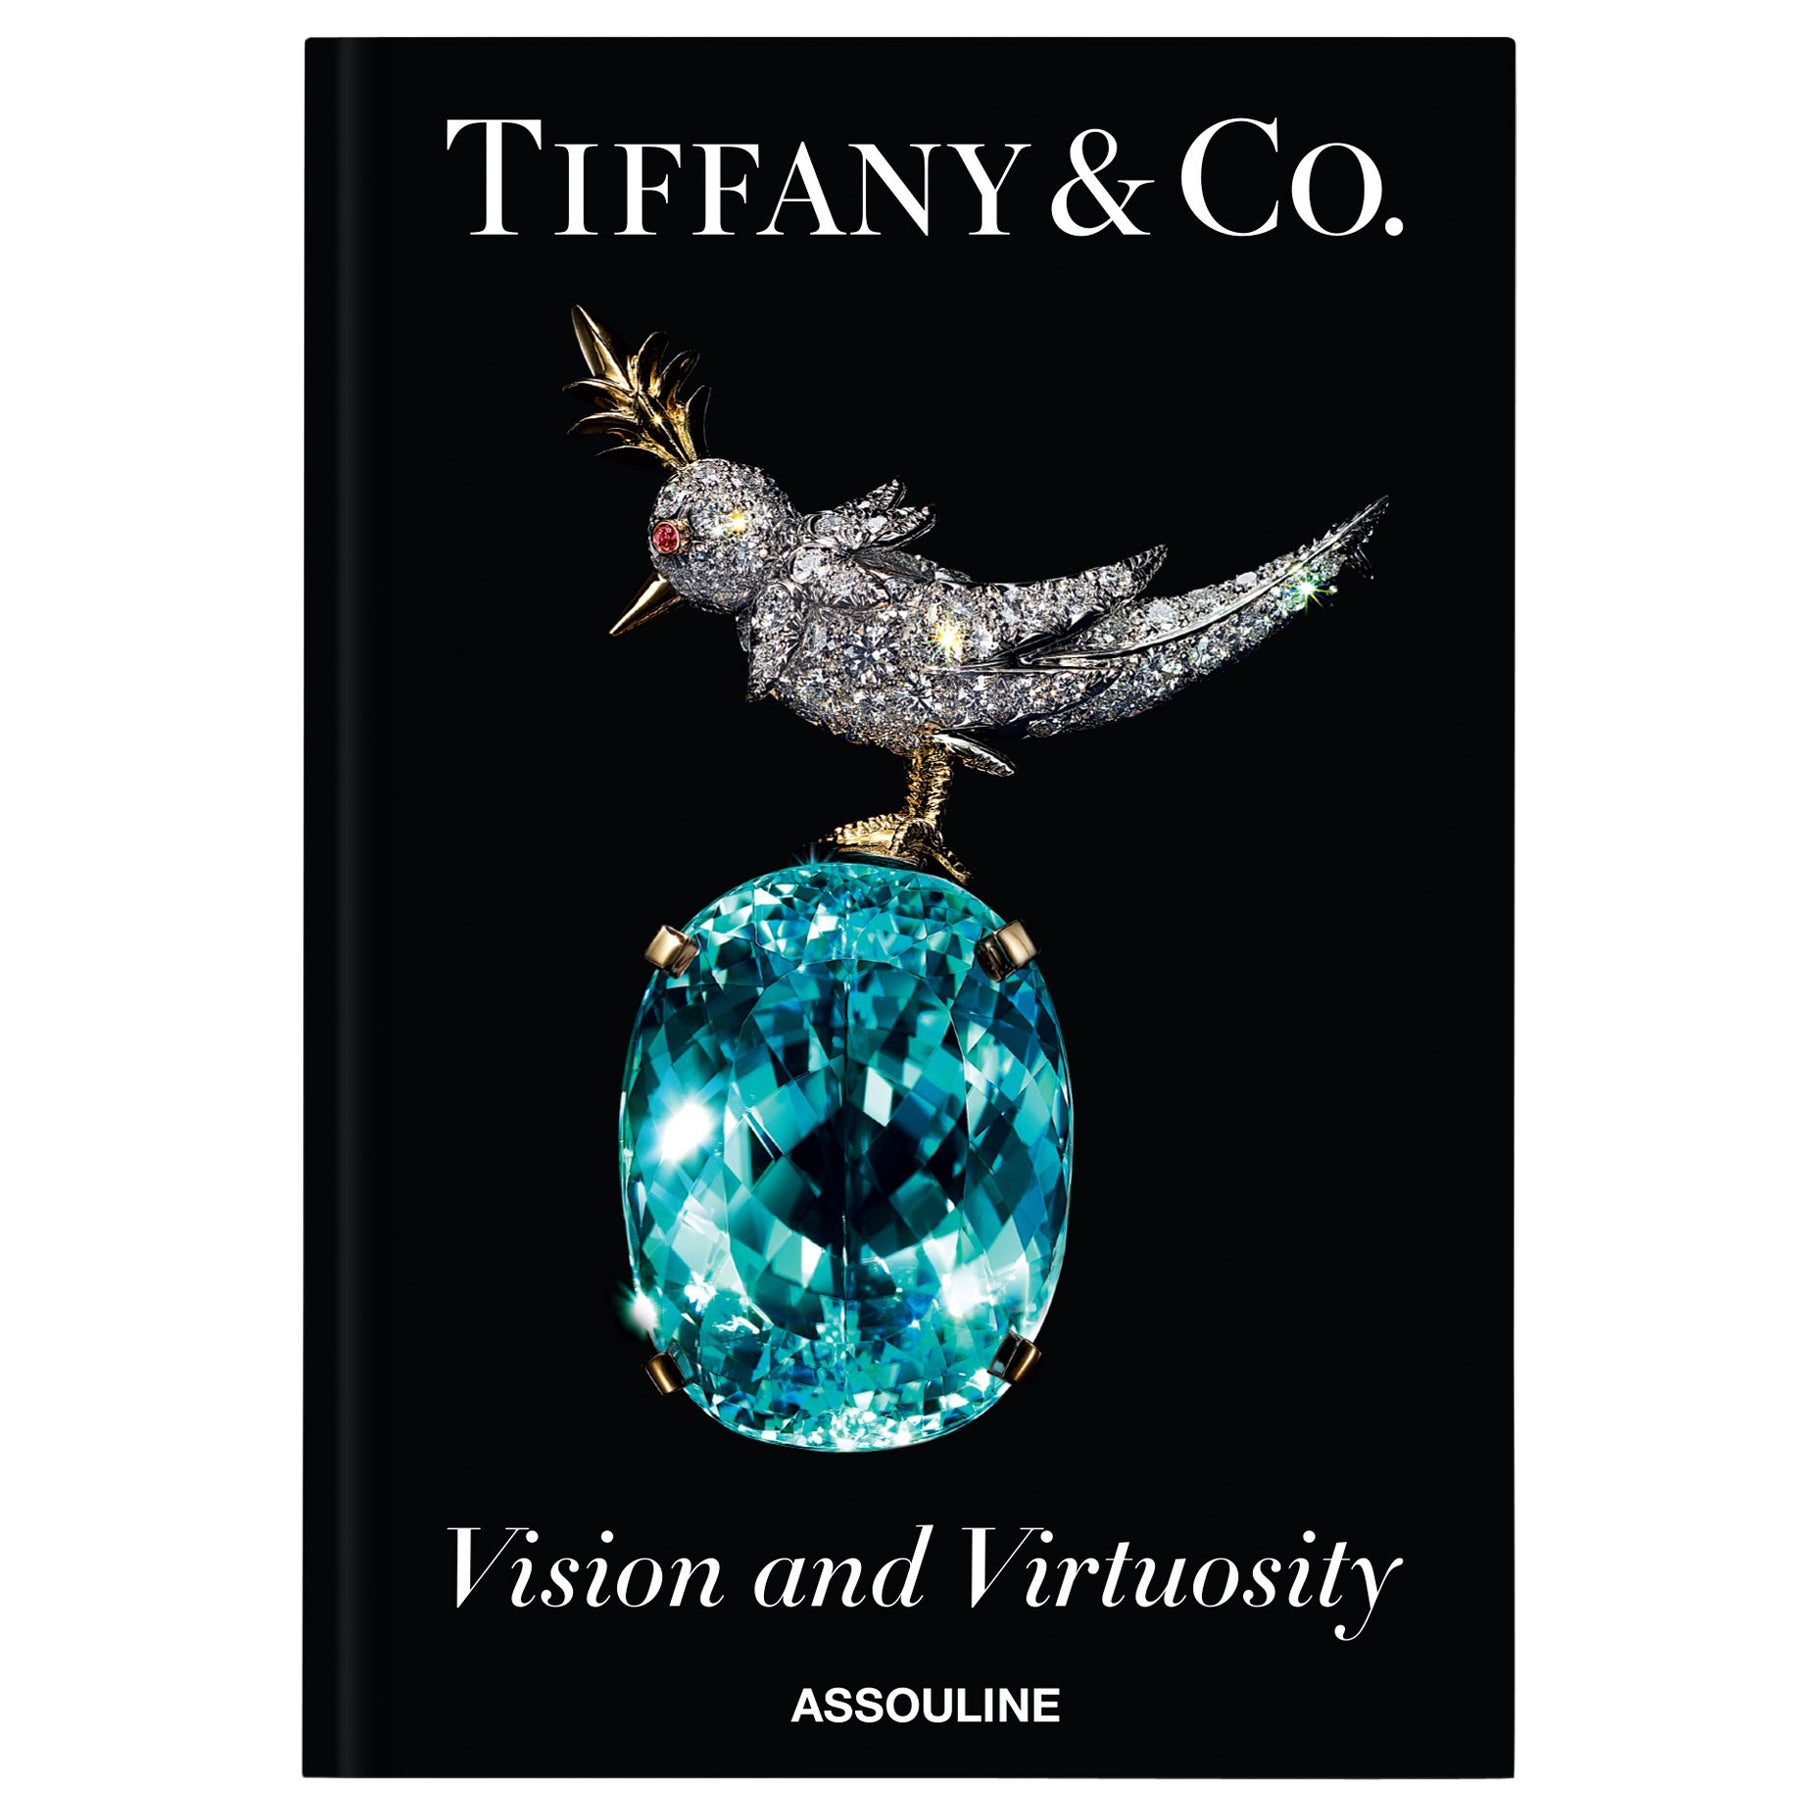 When Charles Lewis Tiffany opened his first store in 1837 in New York City, selling “fancy goods” imported from Paris, he could not have imagined the visions of glamour that his name would conjure around the world. Tiffany & Co. has transformed from